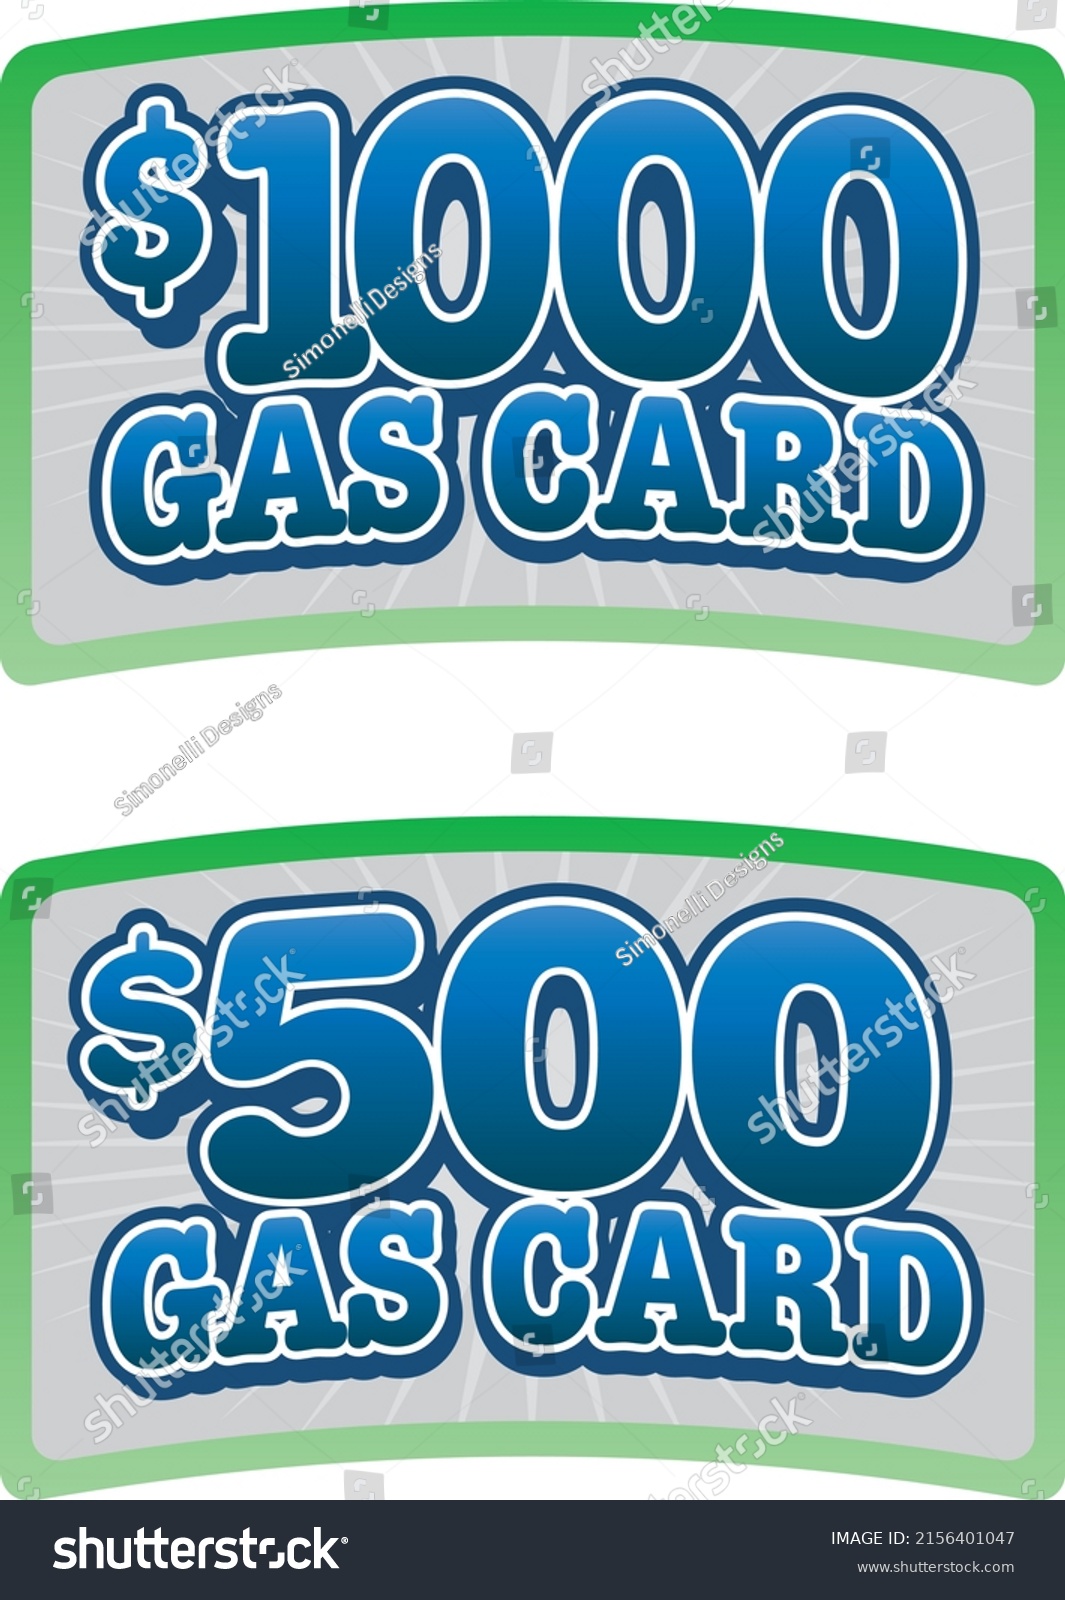 SVG of gas card money card $1000 $500 Free Gas svg